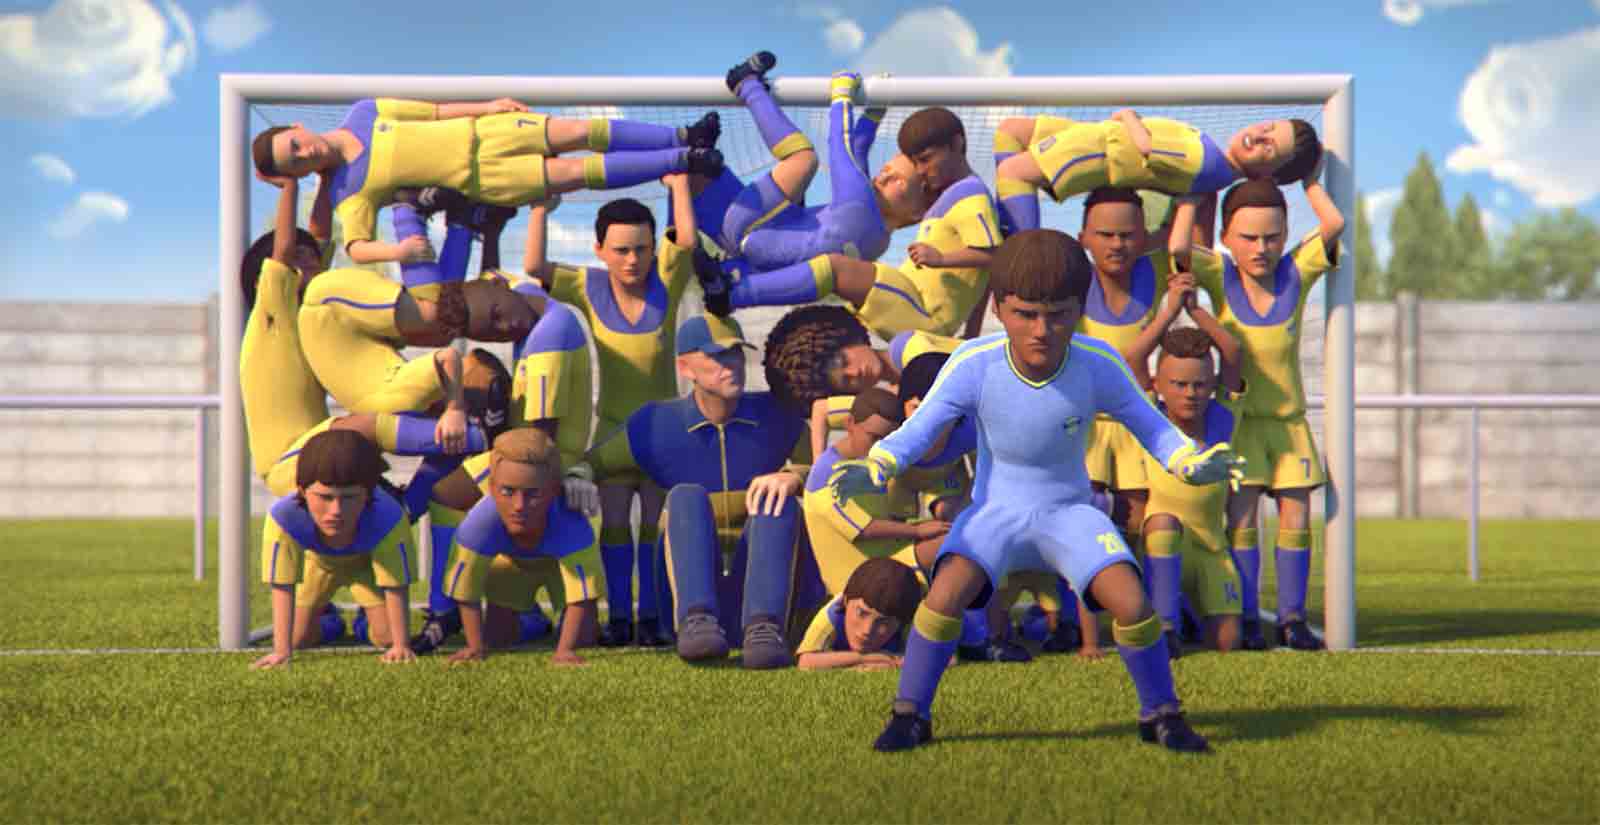 Gatorade - “Heart of a Lio”, the animated short film about Lionel Messi's  life